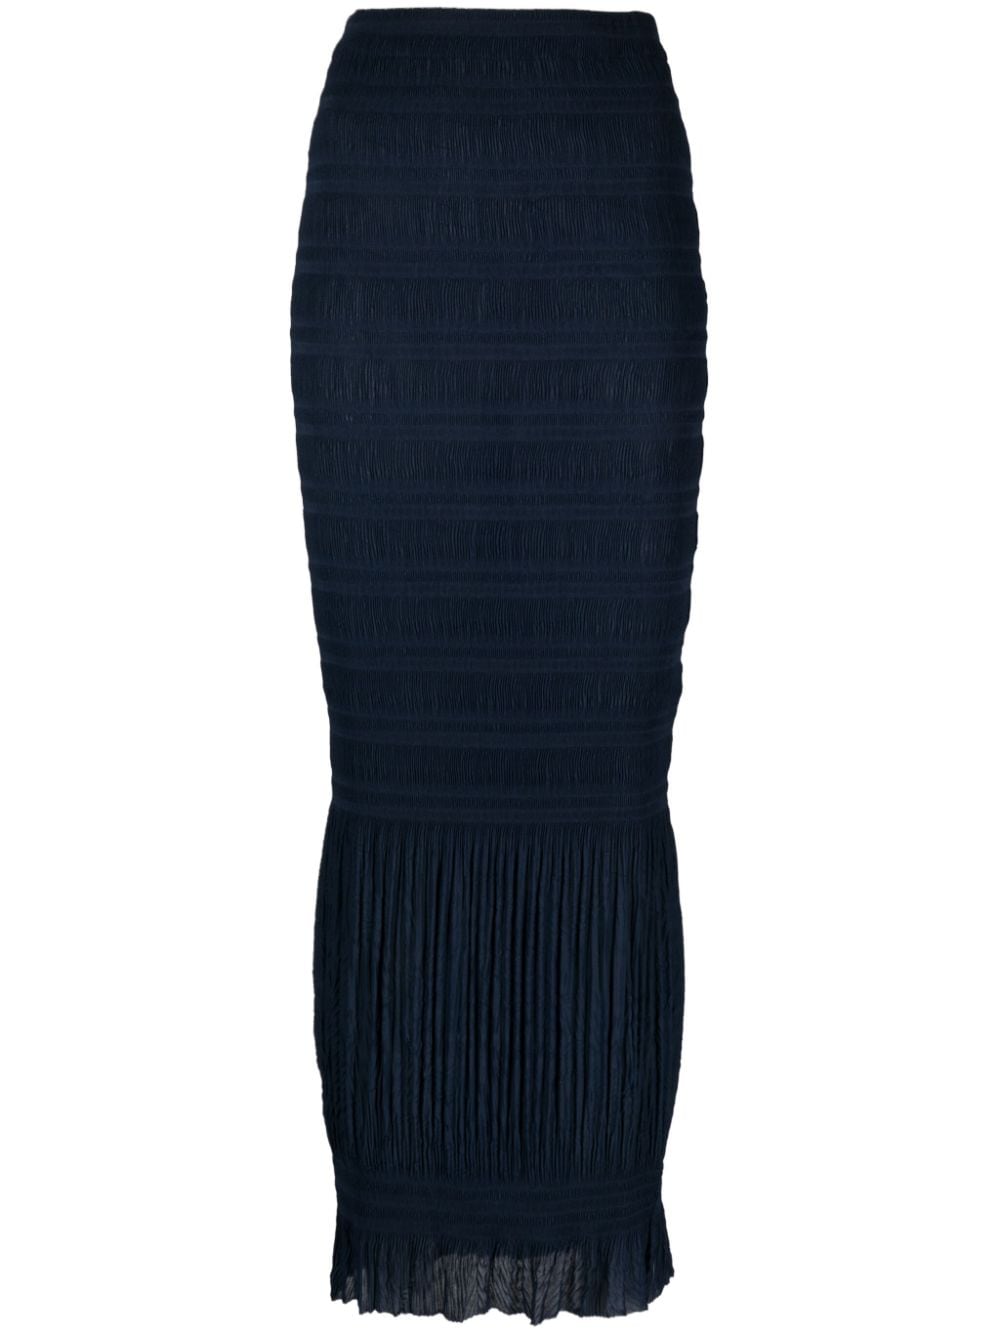 Gianfranco Ferré Pre-Owned 1990s shirred striped maxi skirt - Blue von Gianfranco Ferré Pre-Owned